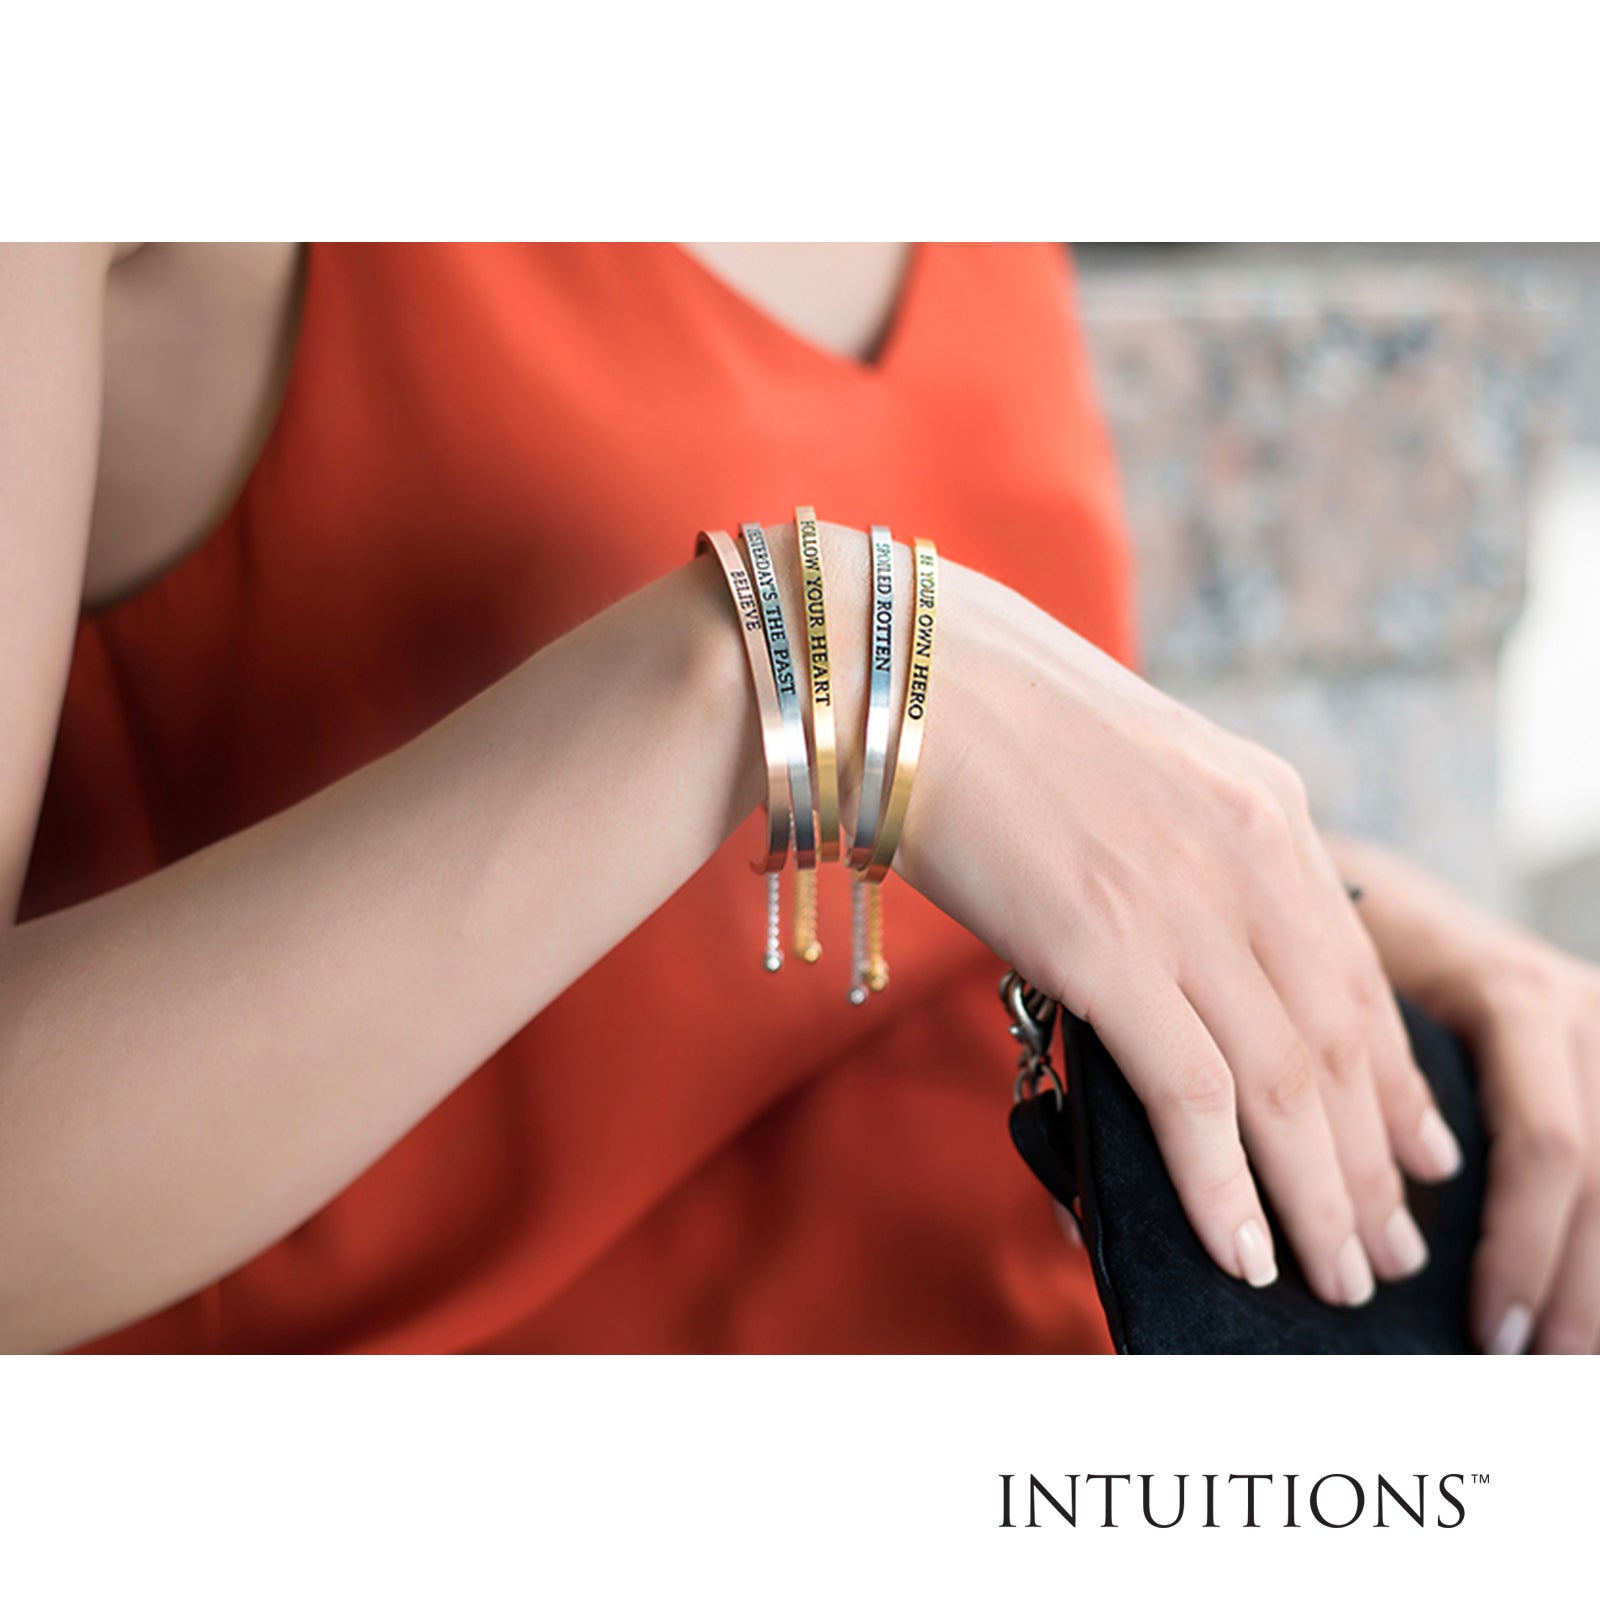 Intuitions Stainless Steel PRINCESS Diamond Accent Adjustable Bracelet